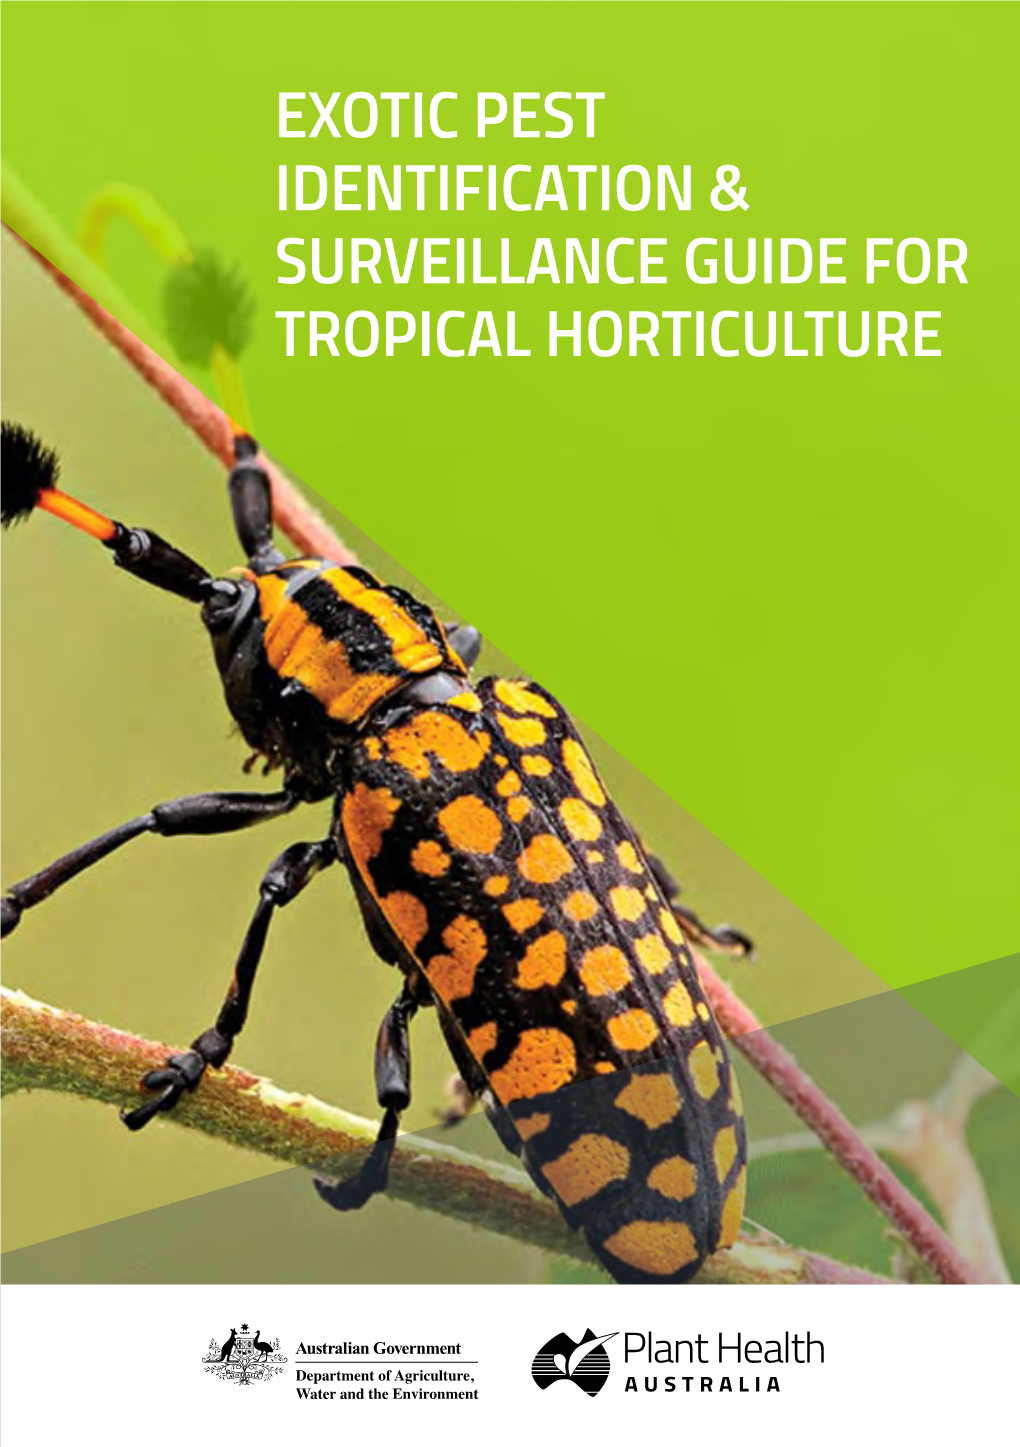 Exotic Pest Identification and Surveillance Guide for Tropical Horticulture (Version 1.0 February, 2021)